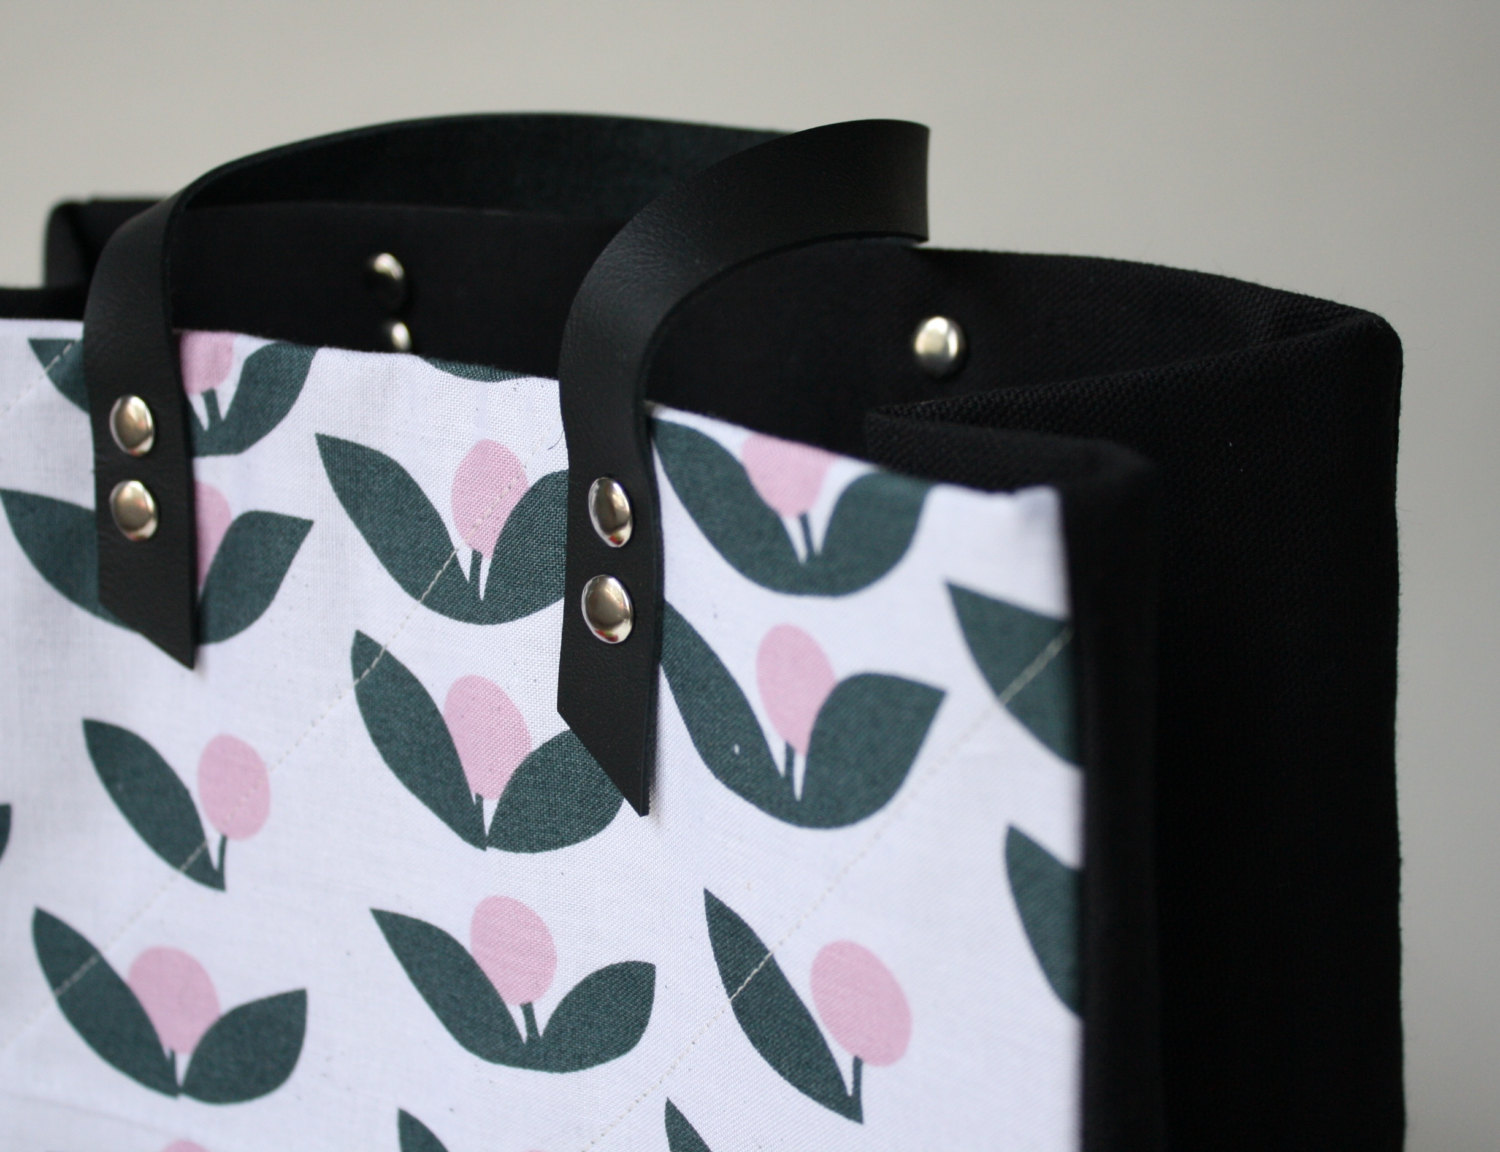 Canvas Tote Bag, Market Bag with Lotta Jansdotter Contrast Fabric